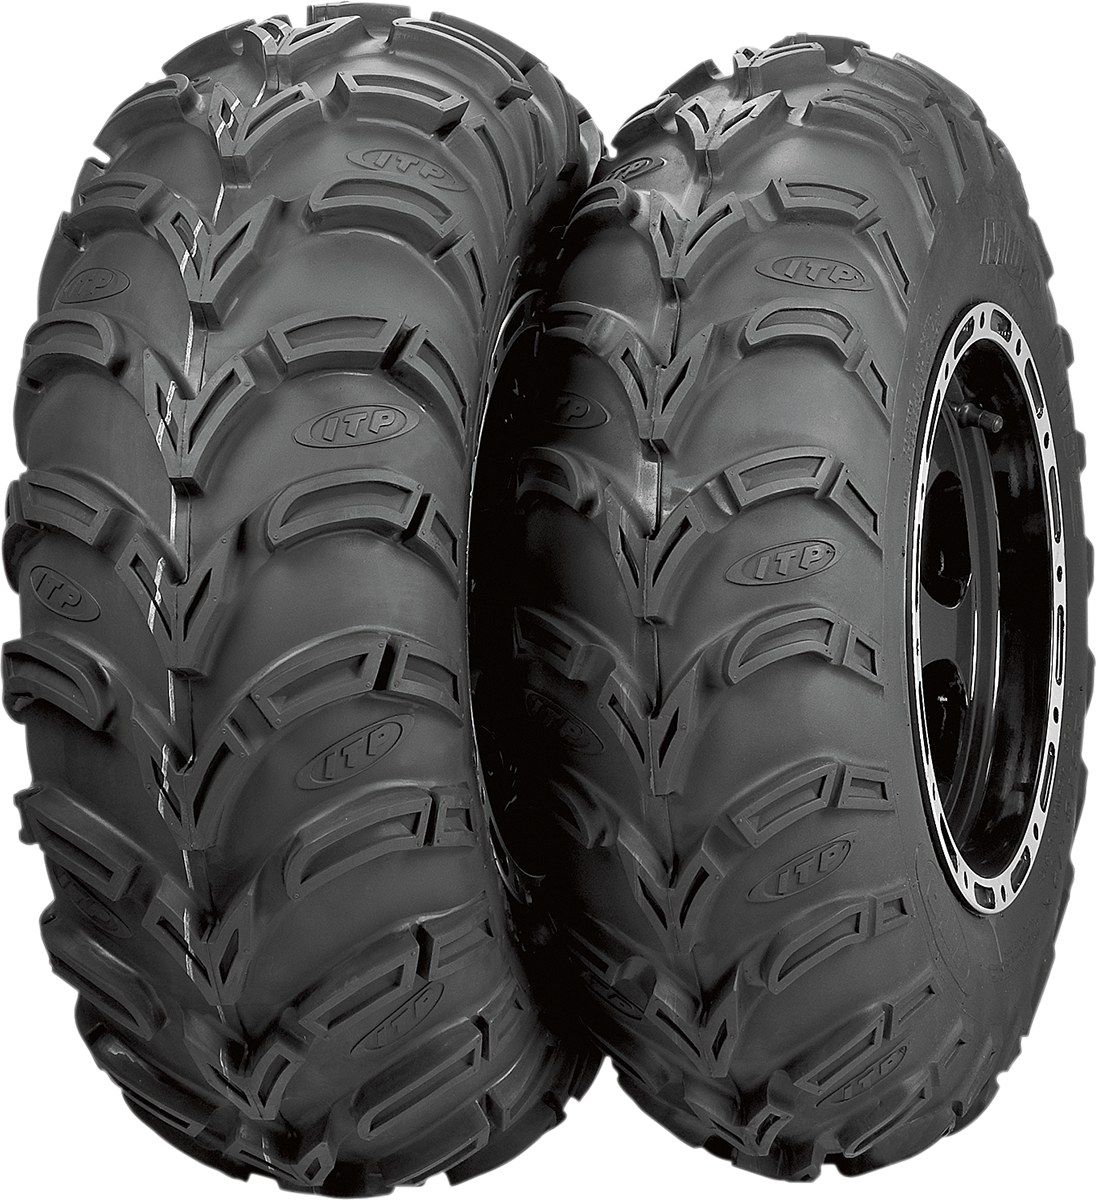 ITP Tire - Mud Lite XL - Front/Rear - 26x9-12 - 6 Ply 56A3P6